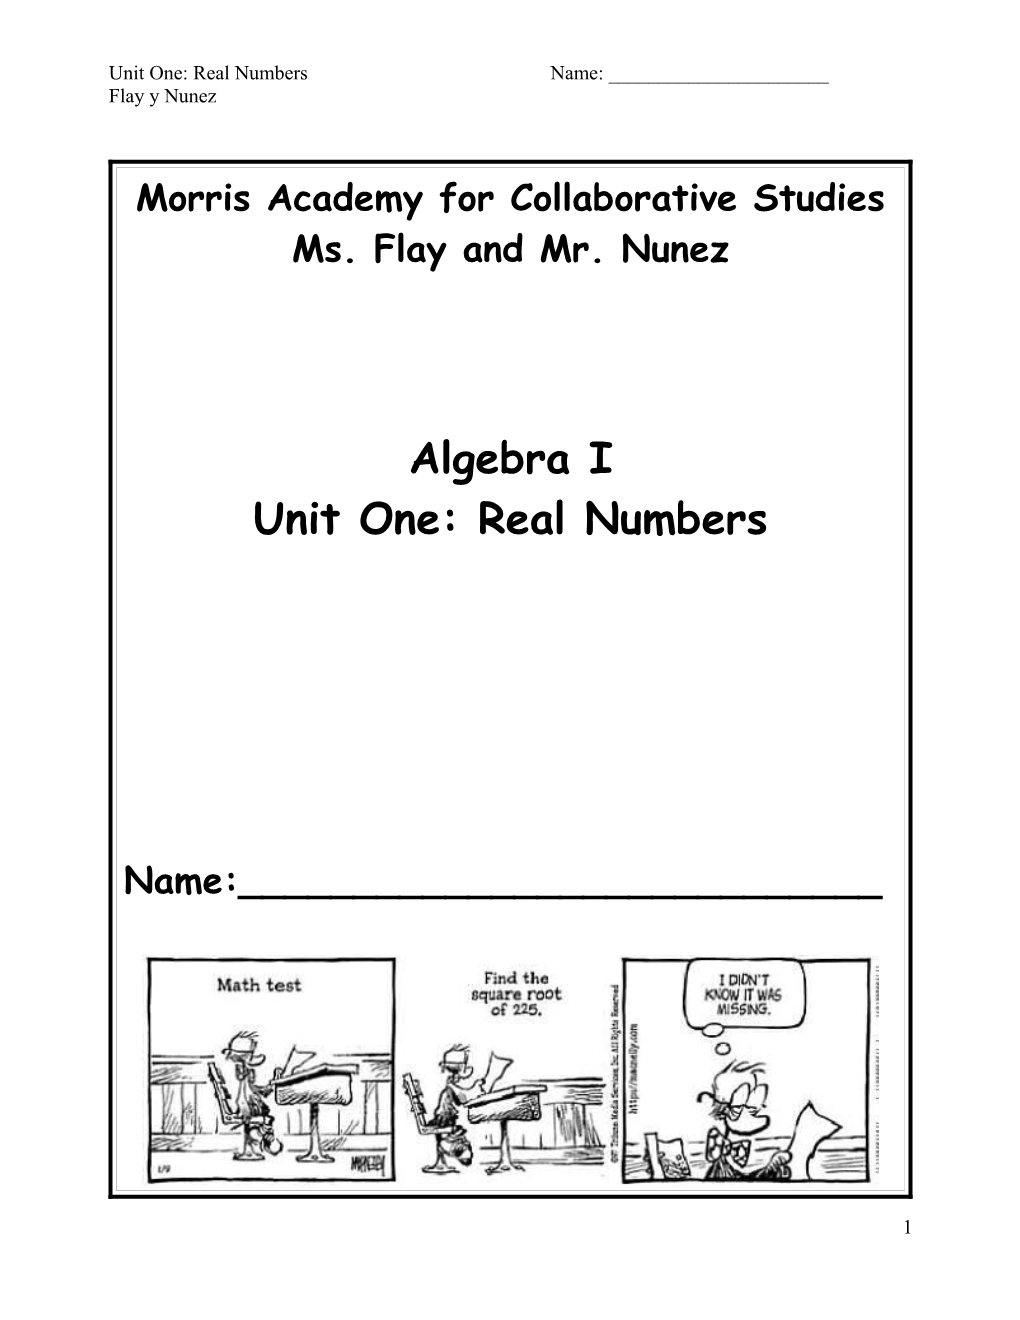 Morrisacademy for Collaborative Studies